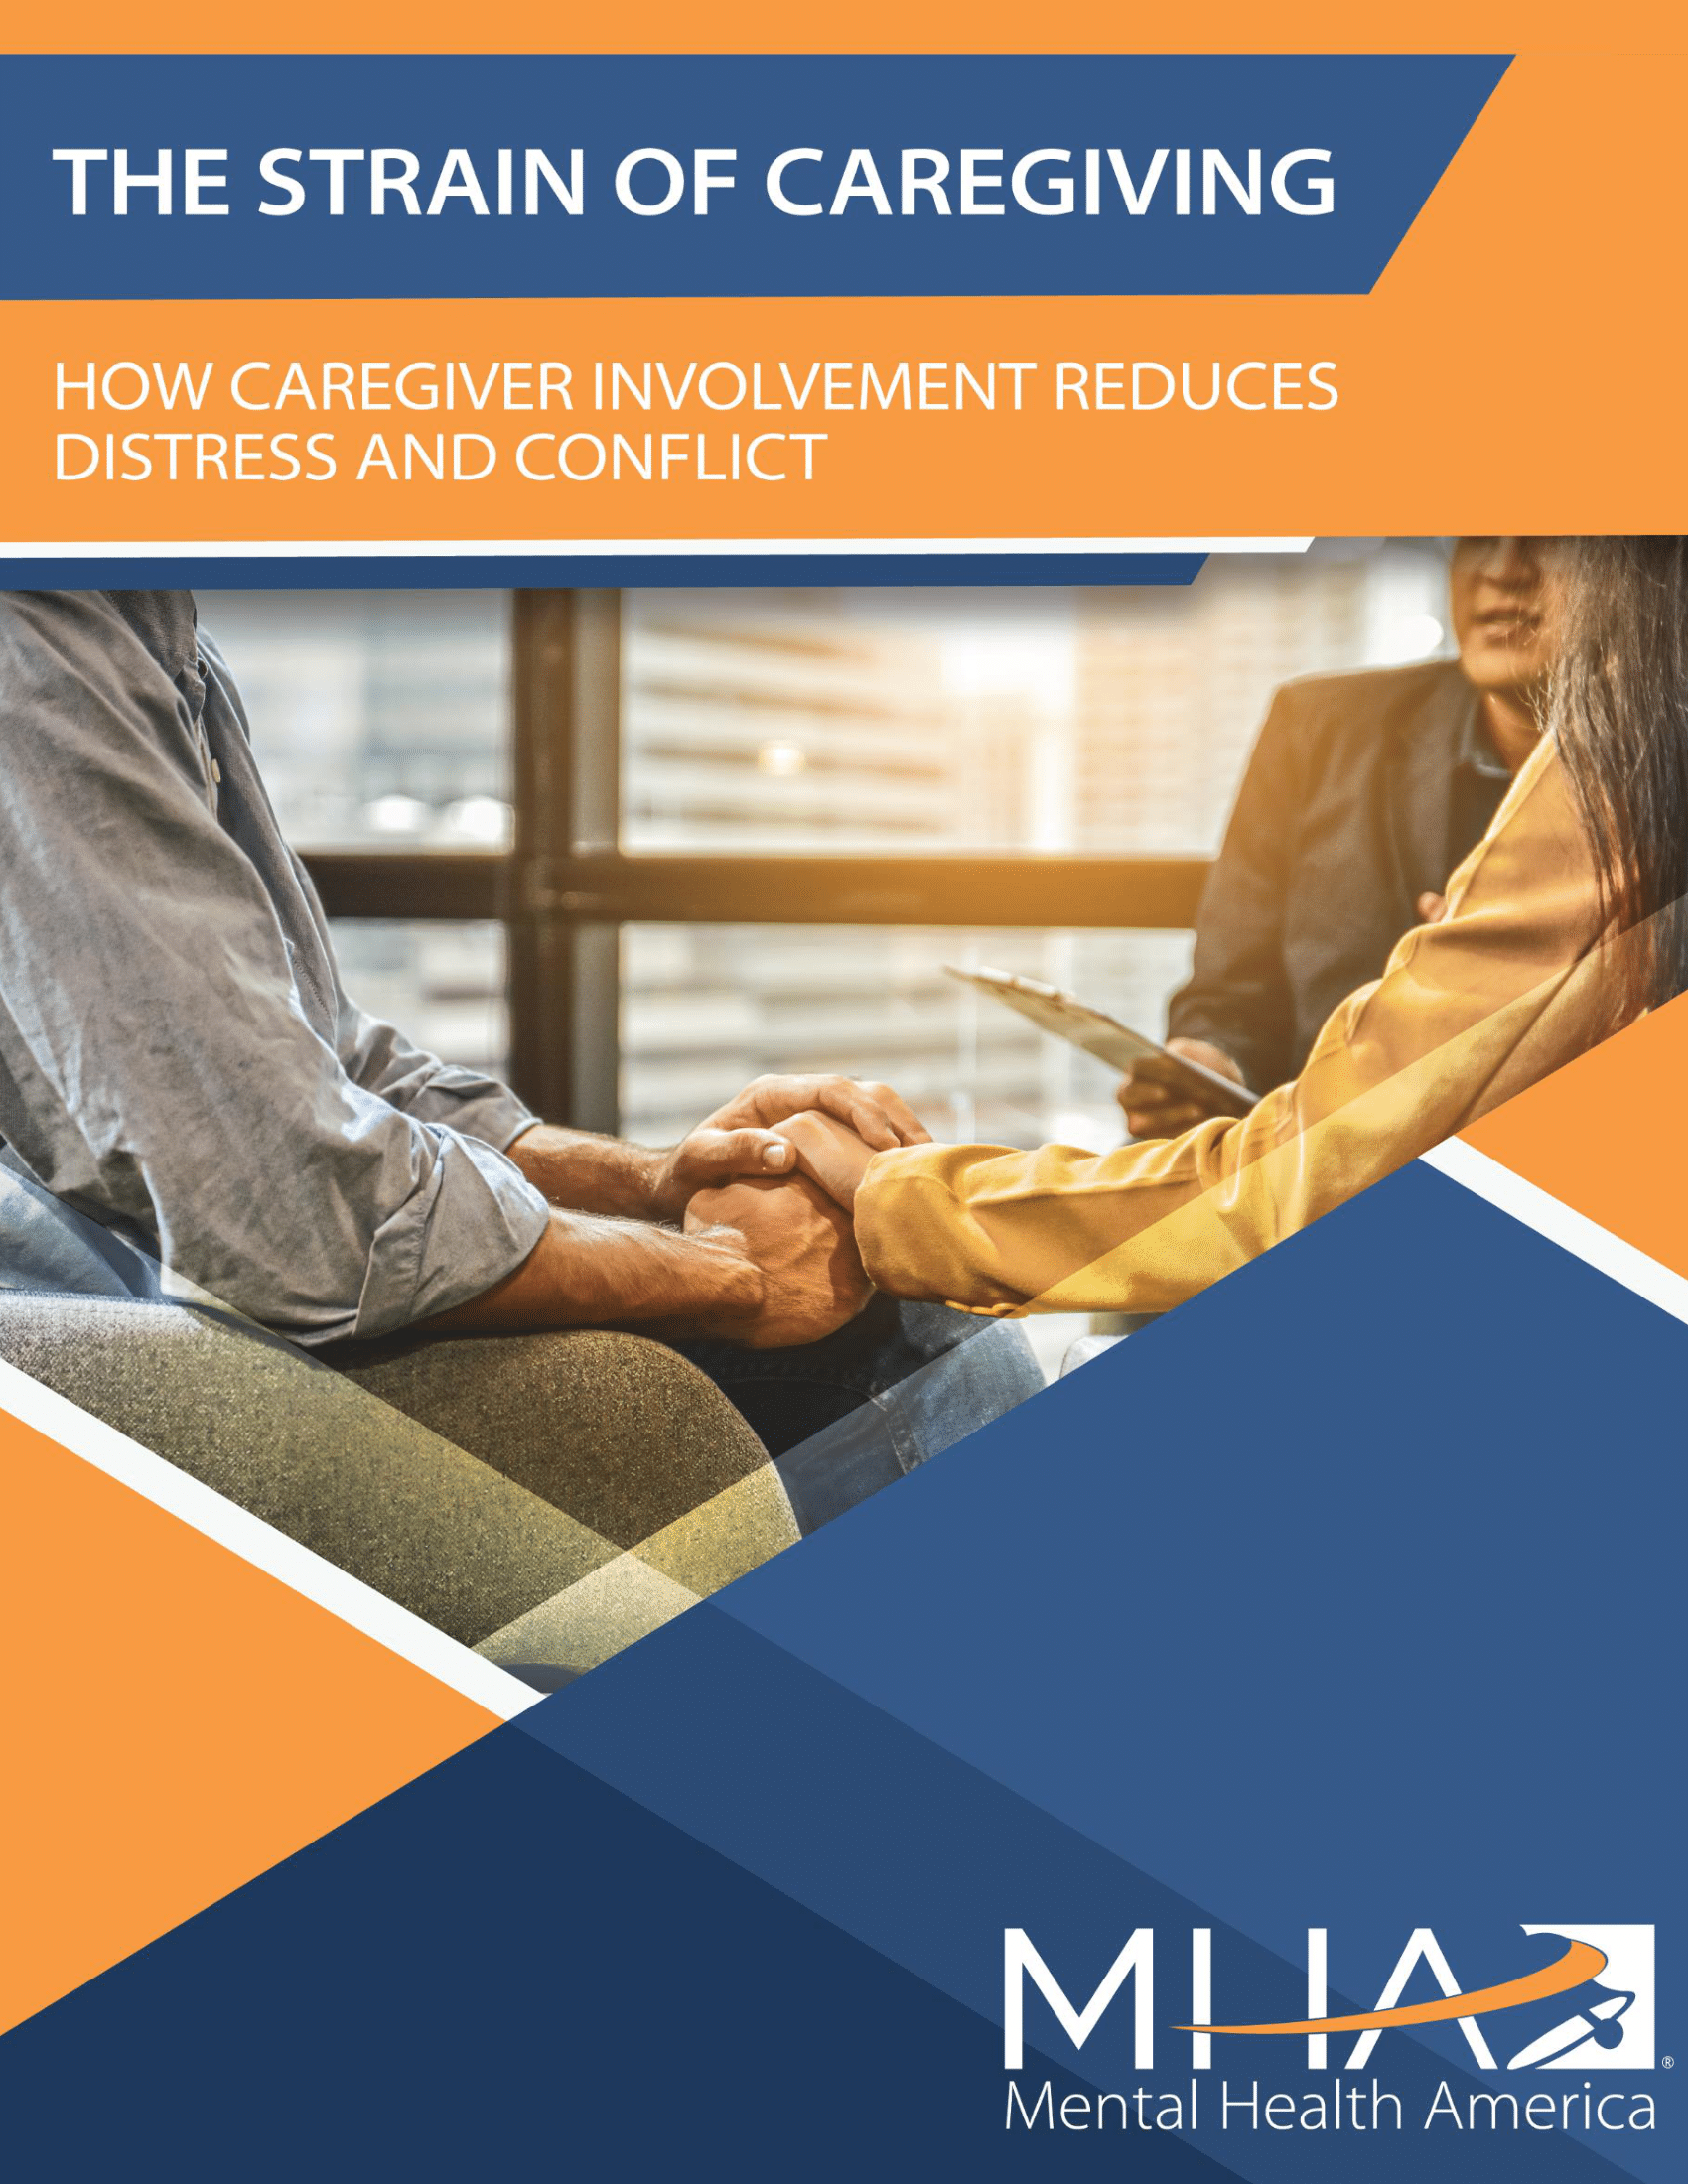 Cover of the Strain of Caregiving Report